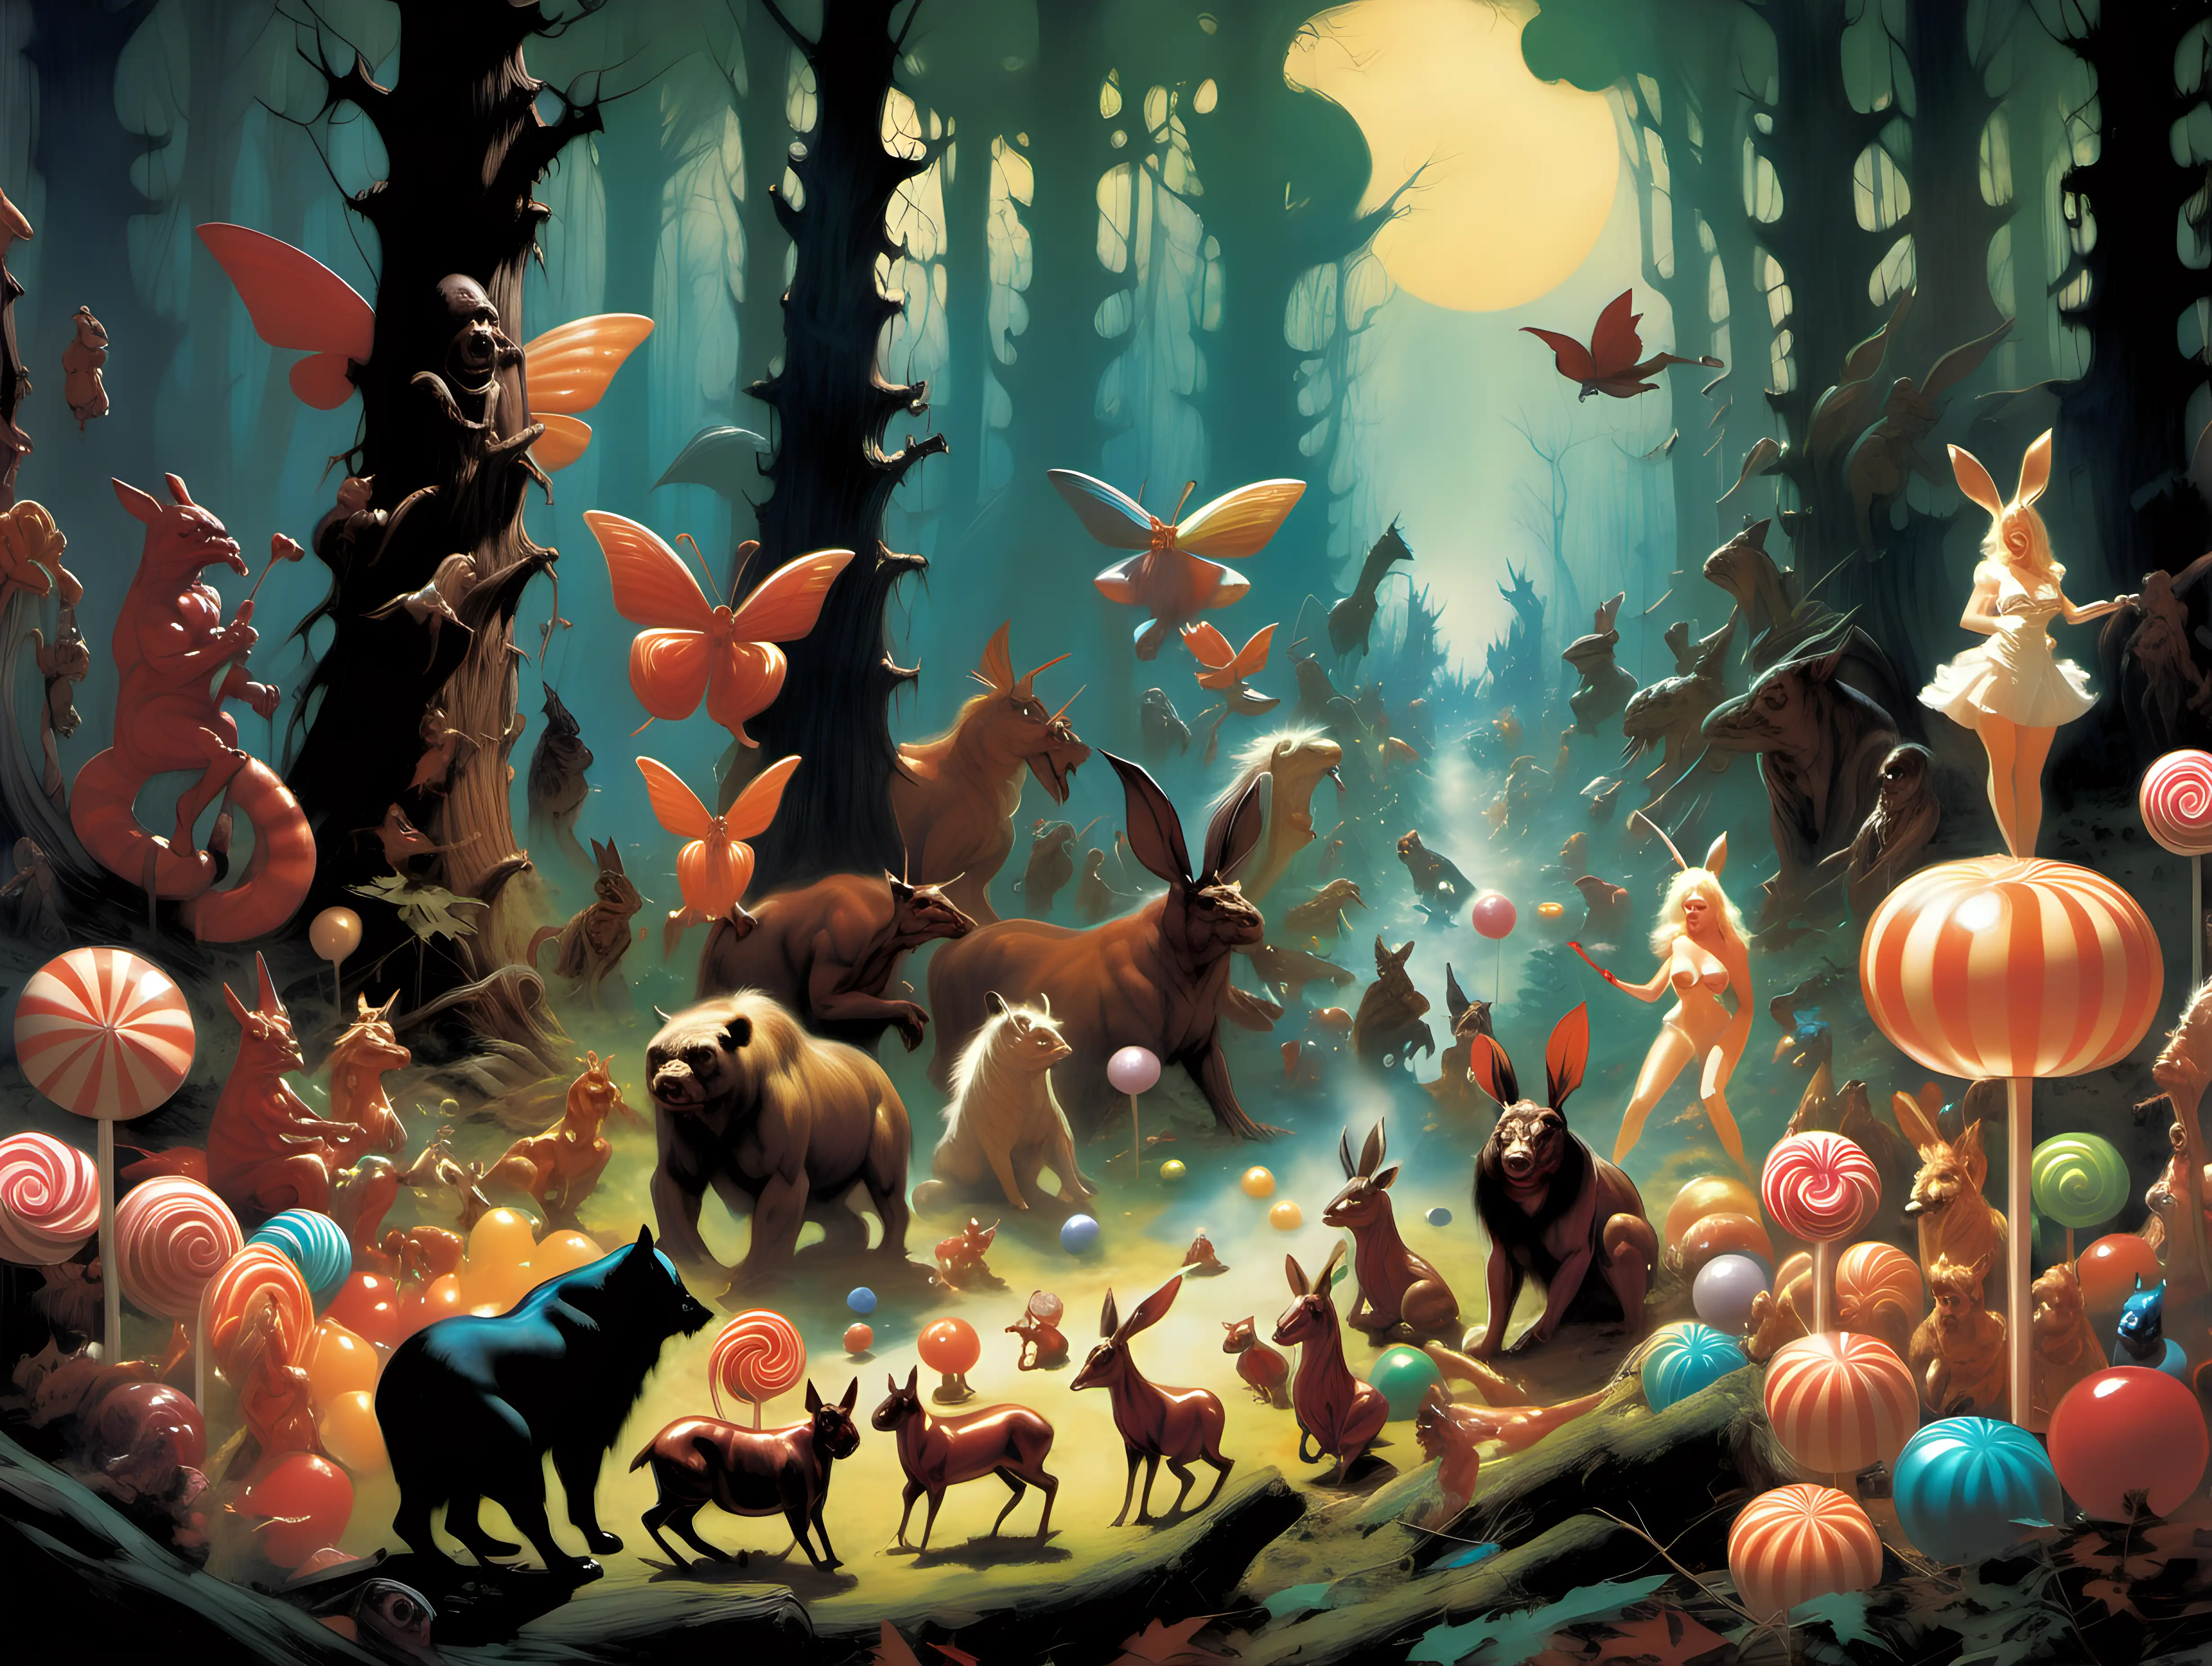 Candy story in the middle of an enchanted forest surrounded by imaginary animals Frank Frazetta style